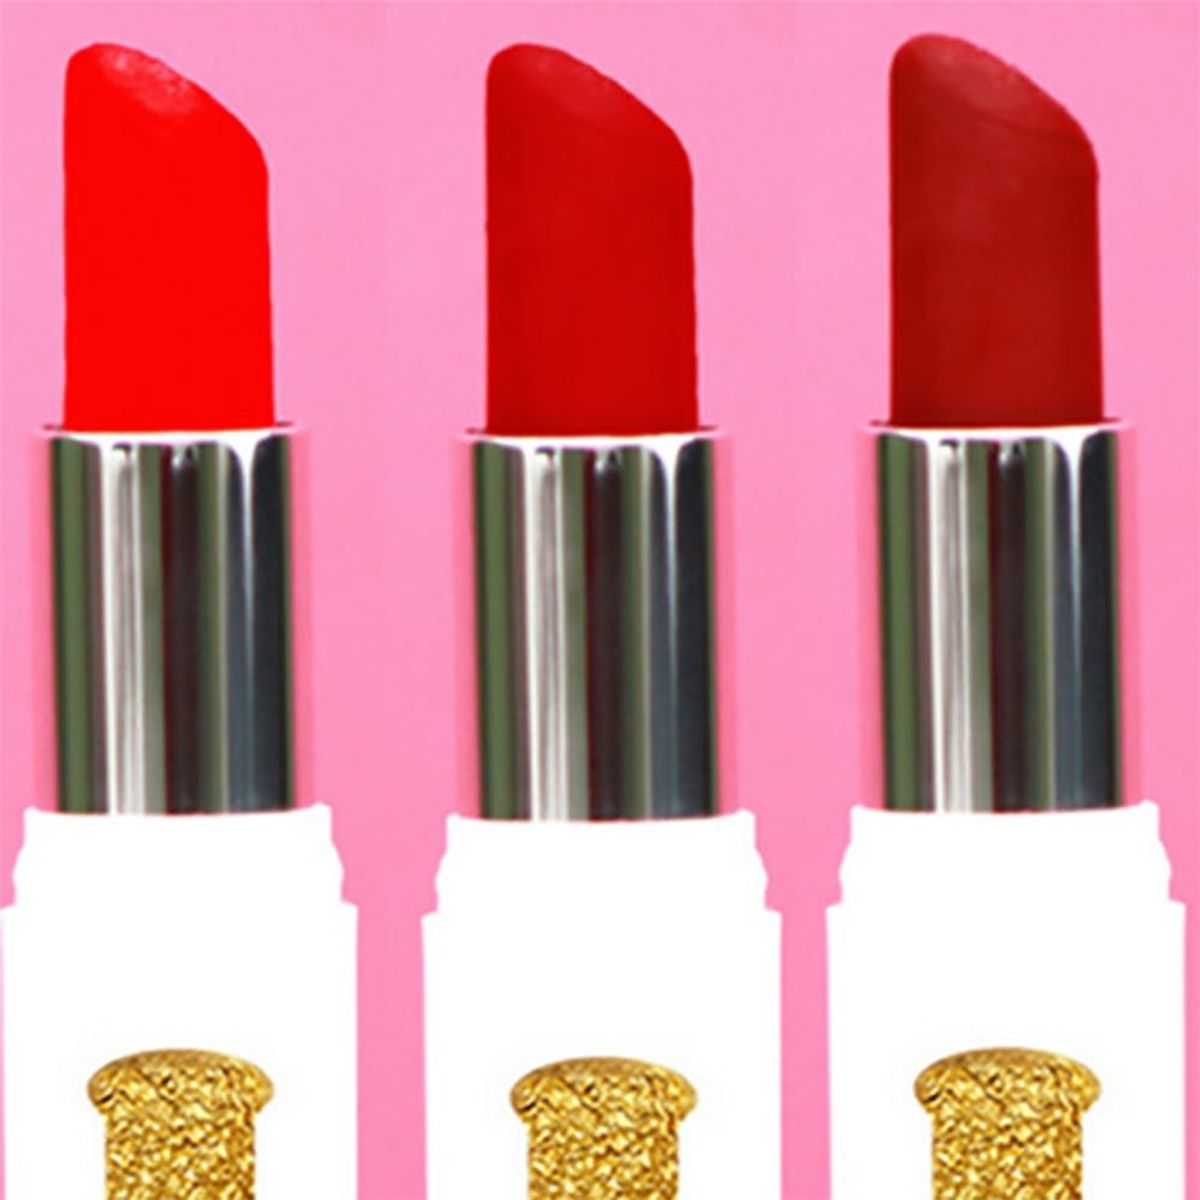 This New Lipstick Line Was Made to Complement Different Lip Tones